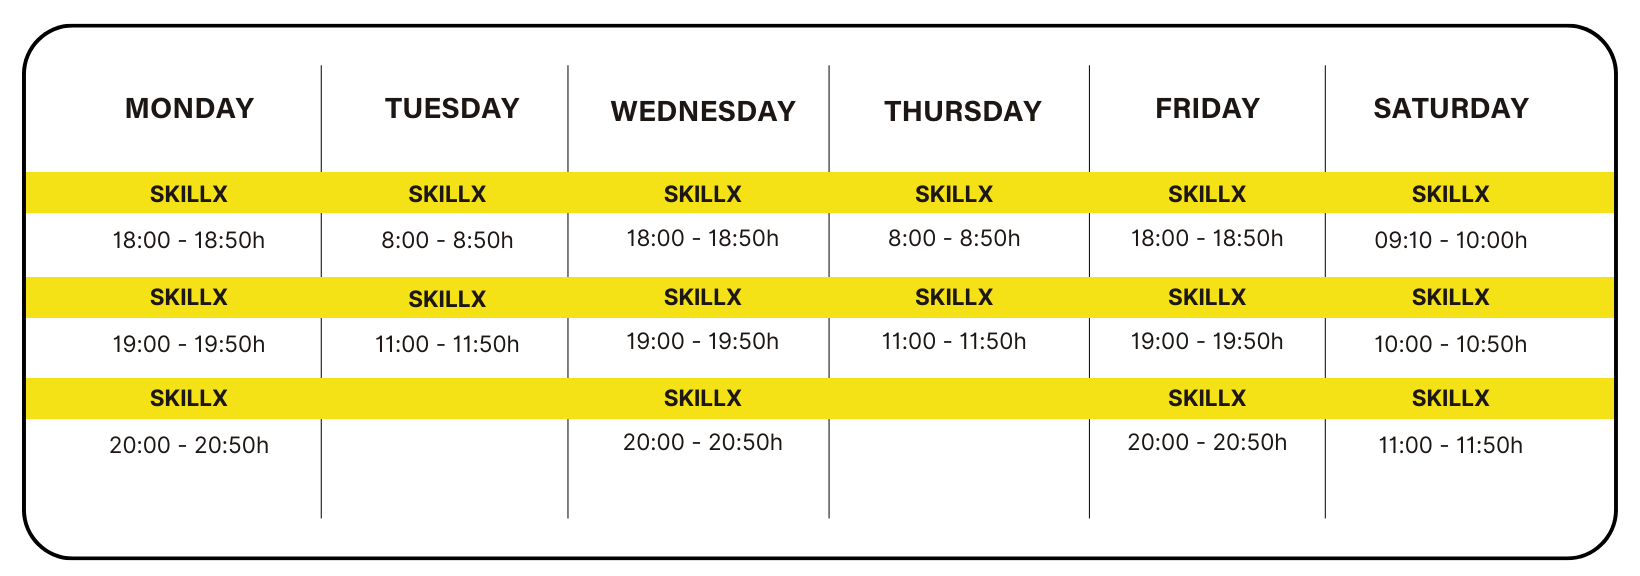 SkillX Class Schedule at Sky Experience